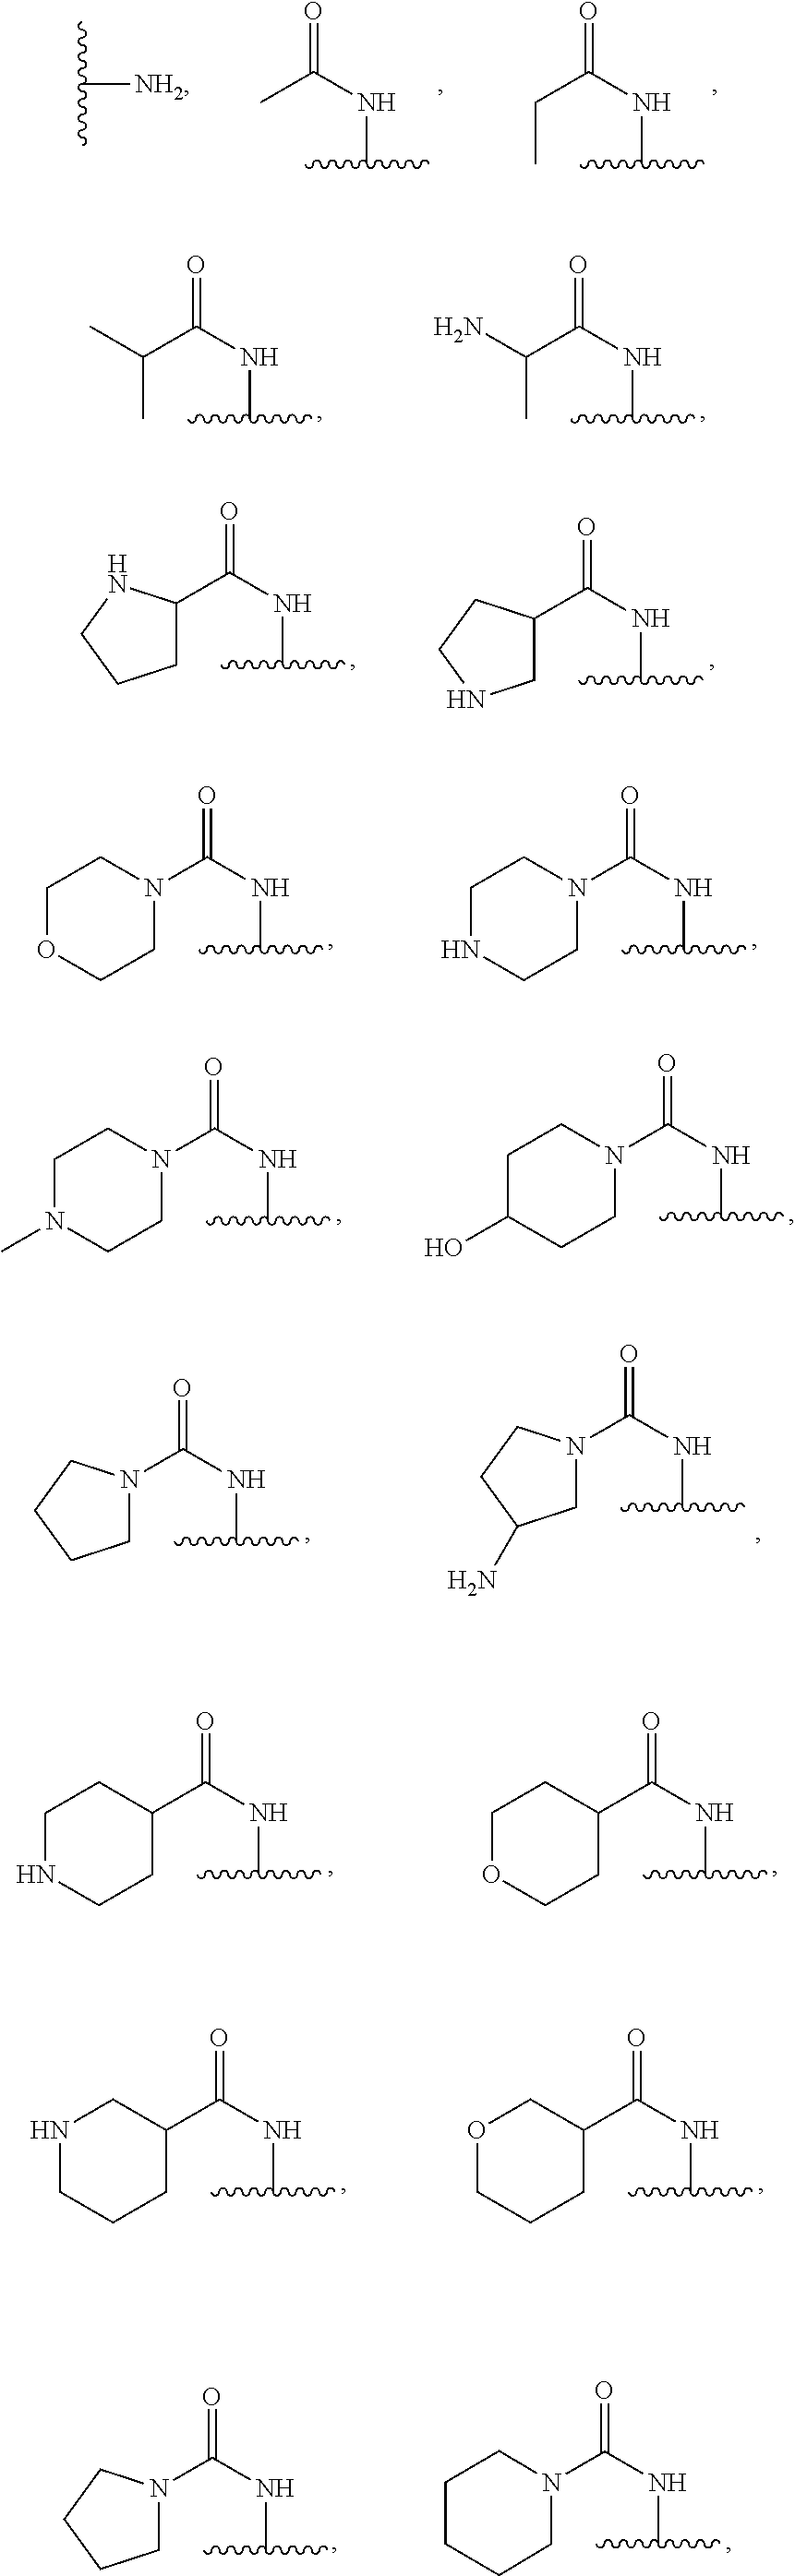 Substituted pyrazolone compounds and methods of use